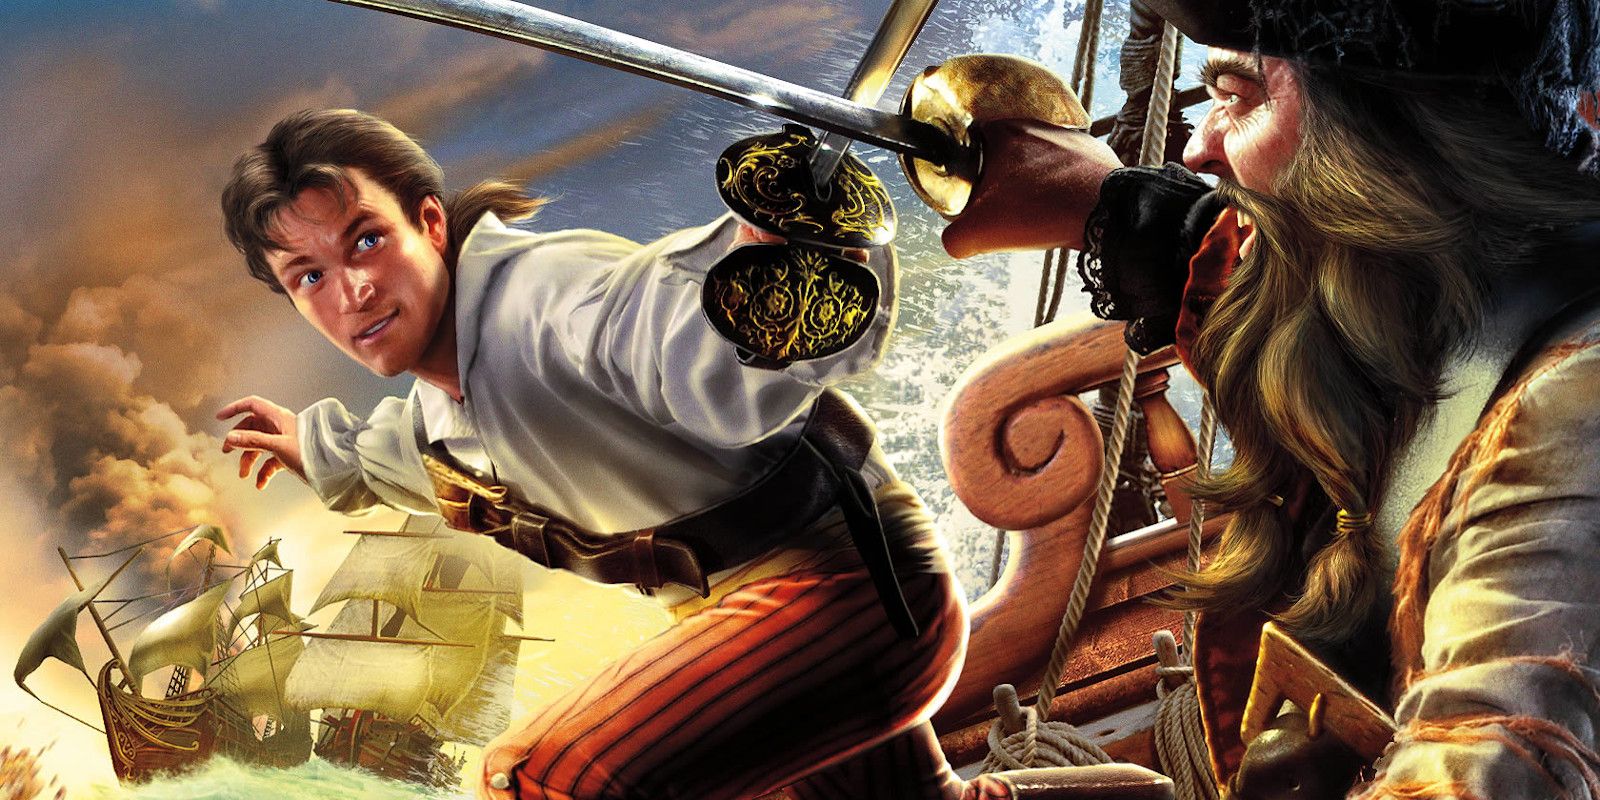 Artwork from Sid Meier's Pirates, showing a ship battle in the background and a swordfight in front.